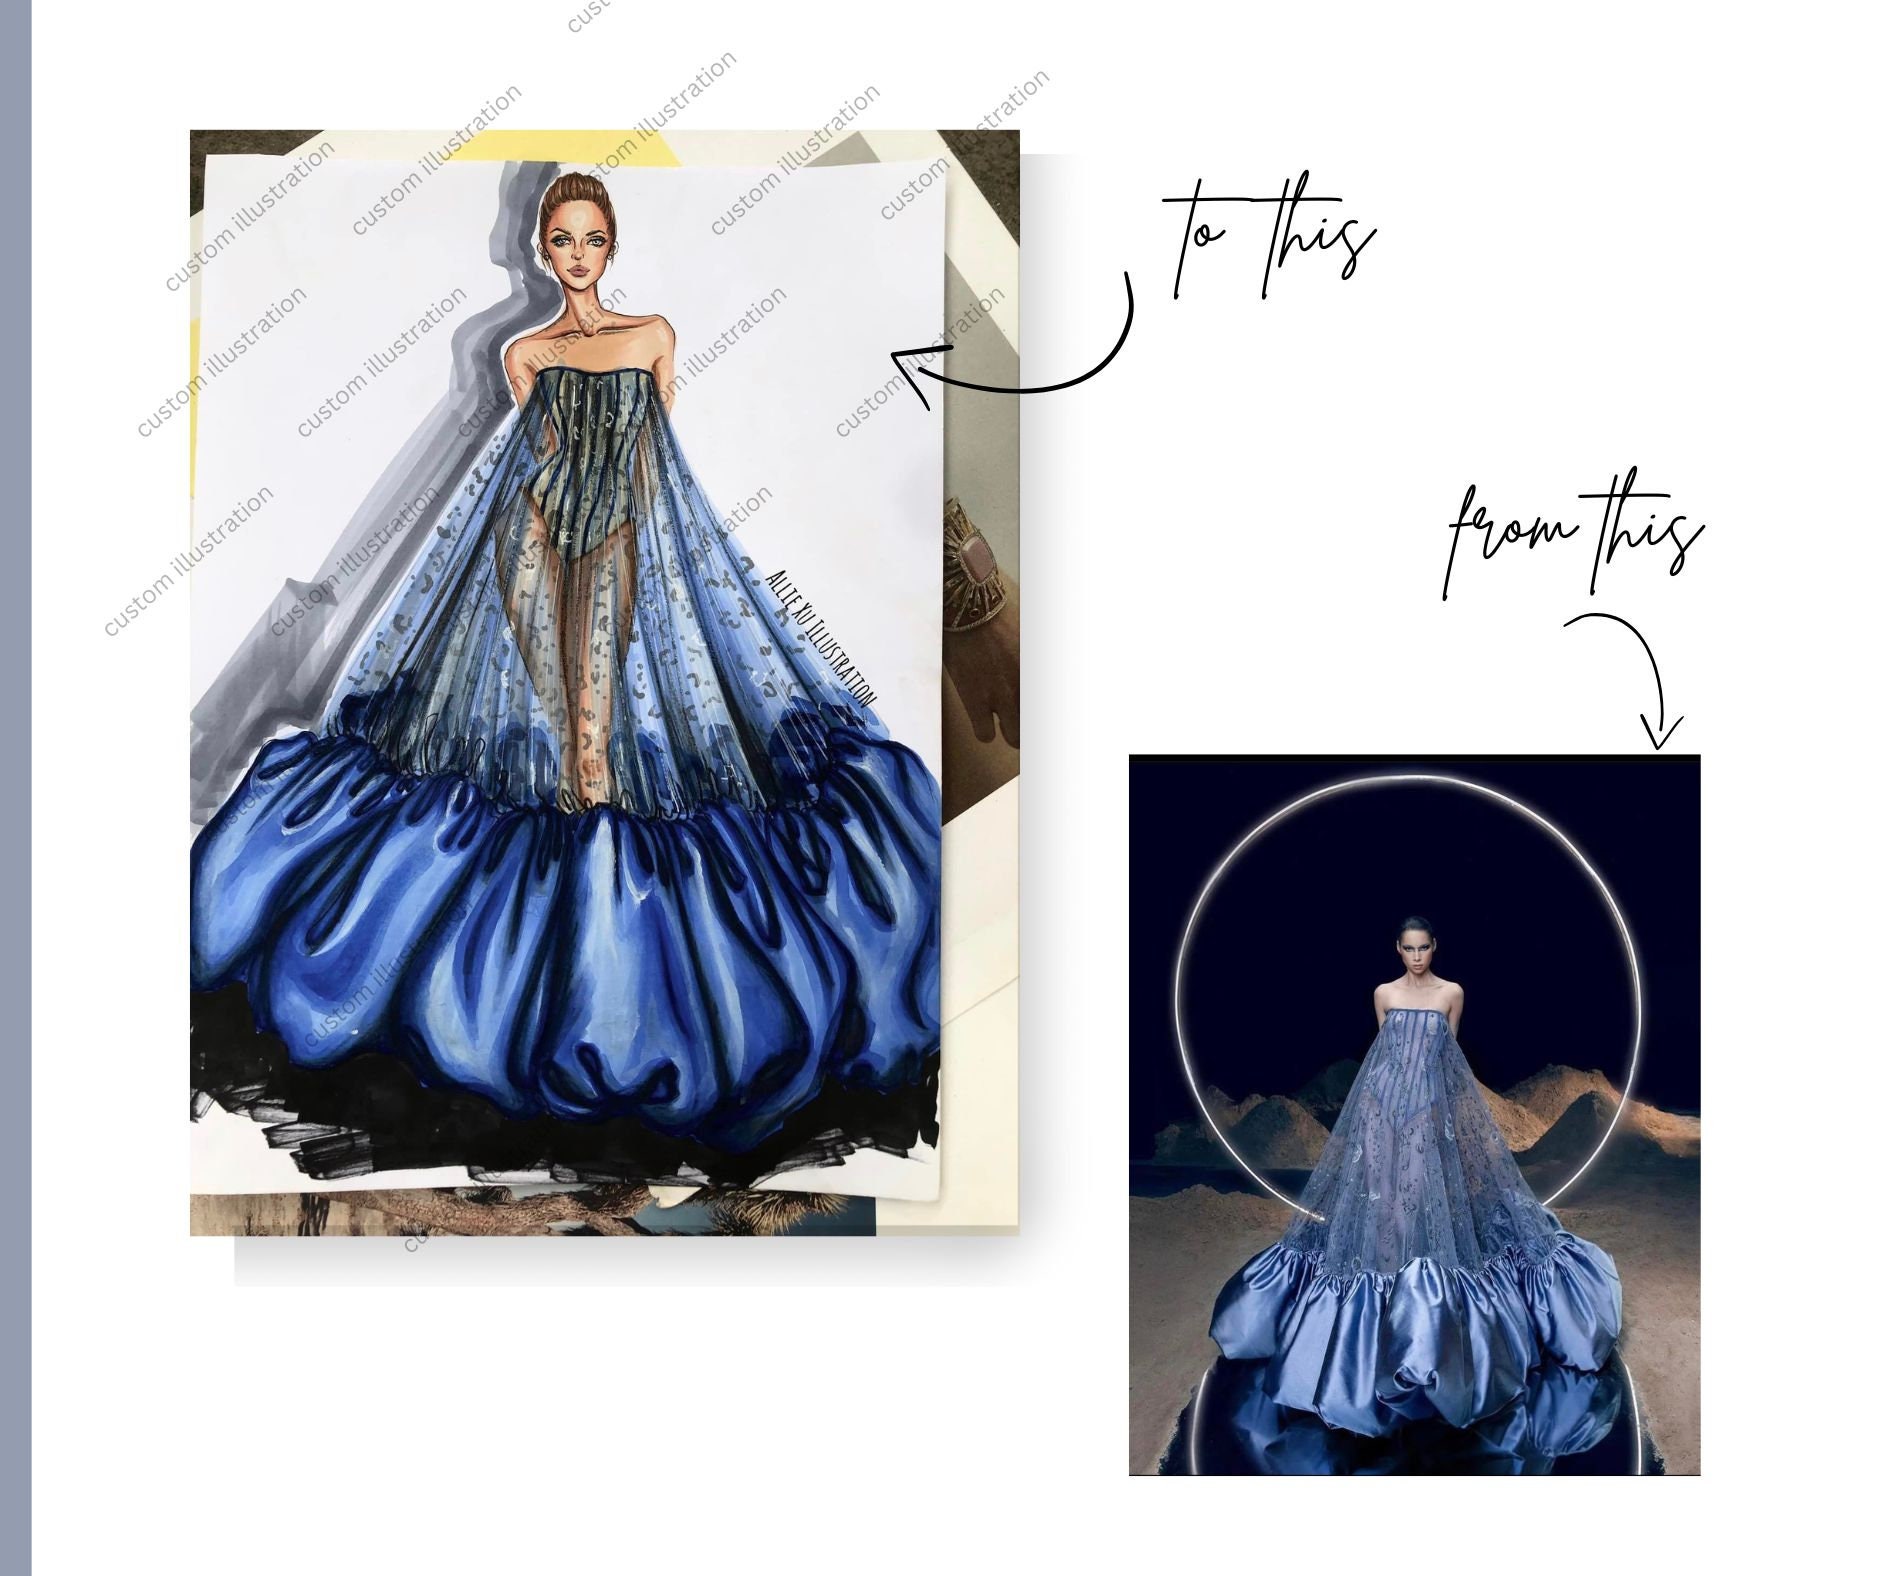 Fashion Drawings of Dresses and Gowns | Fashion illustration dresses,  Fashion illustration sketches dresses, Fashion drawing dresses